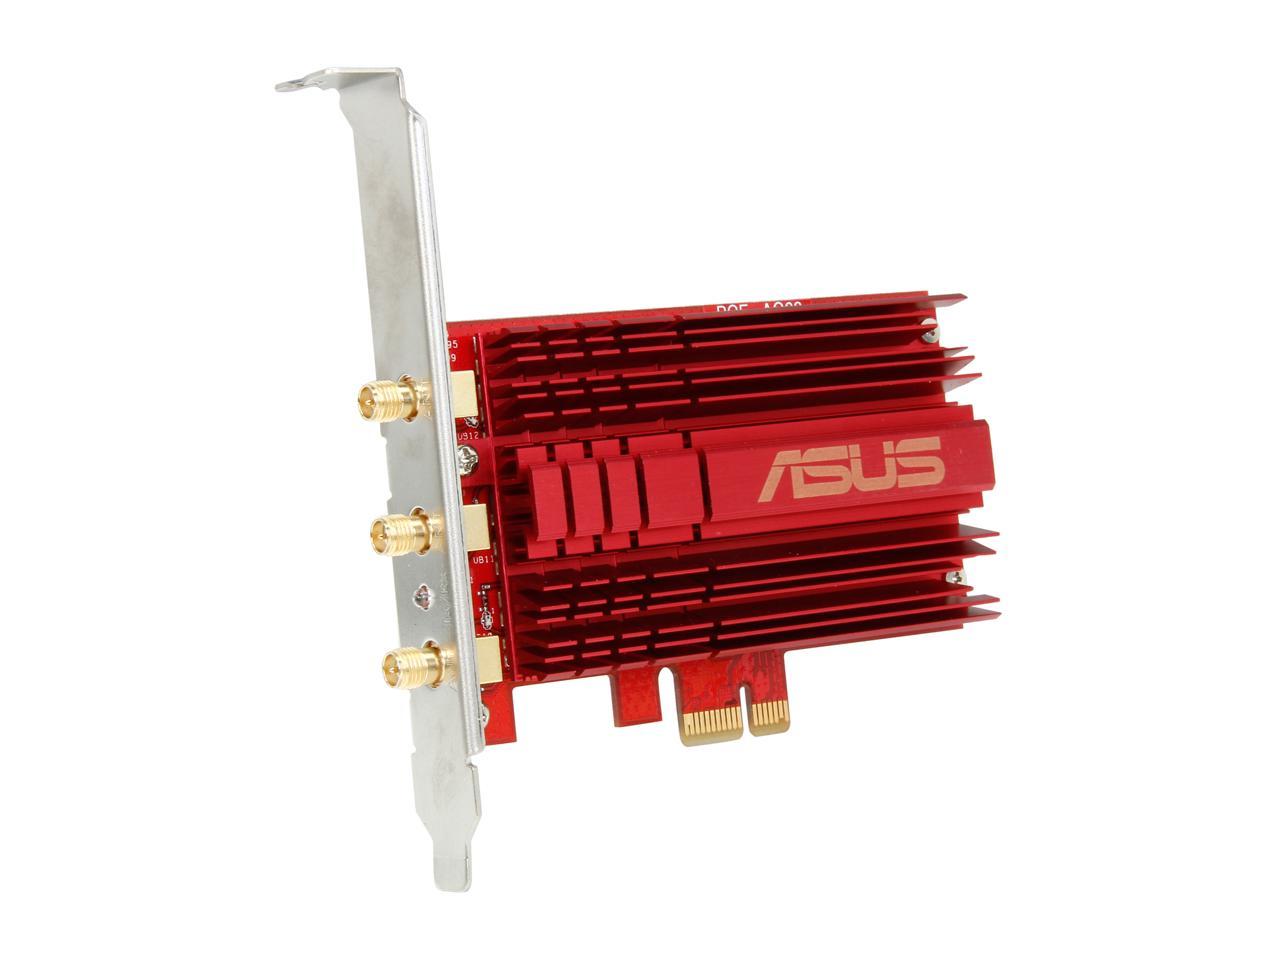 asus pce ac68 us dual band wireless ac1900